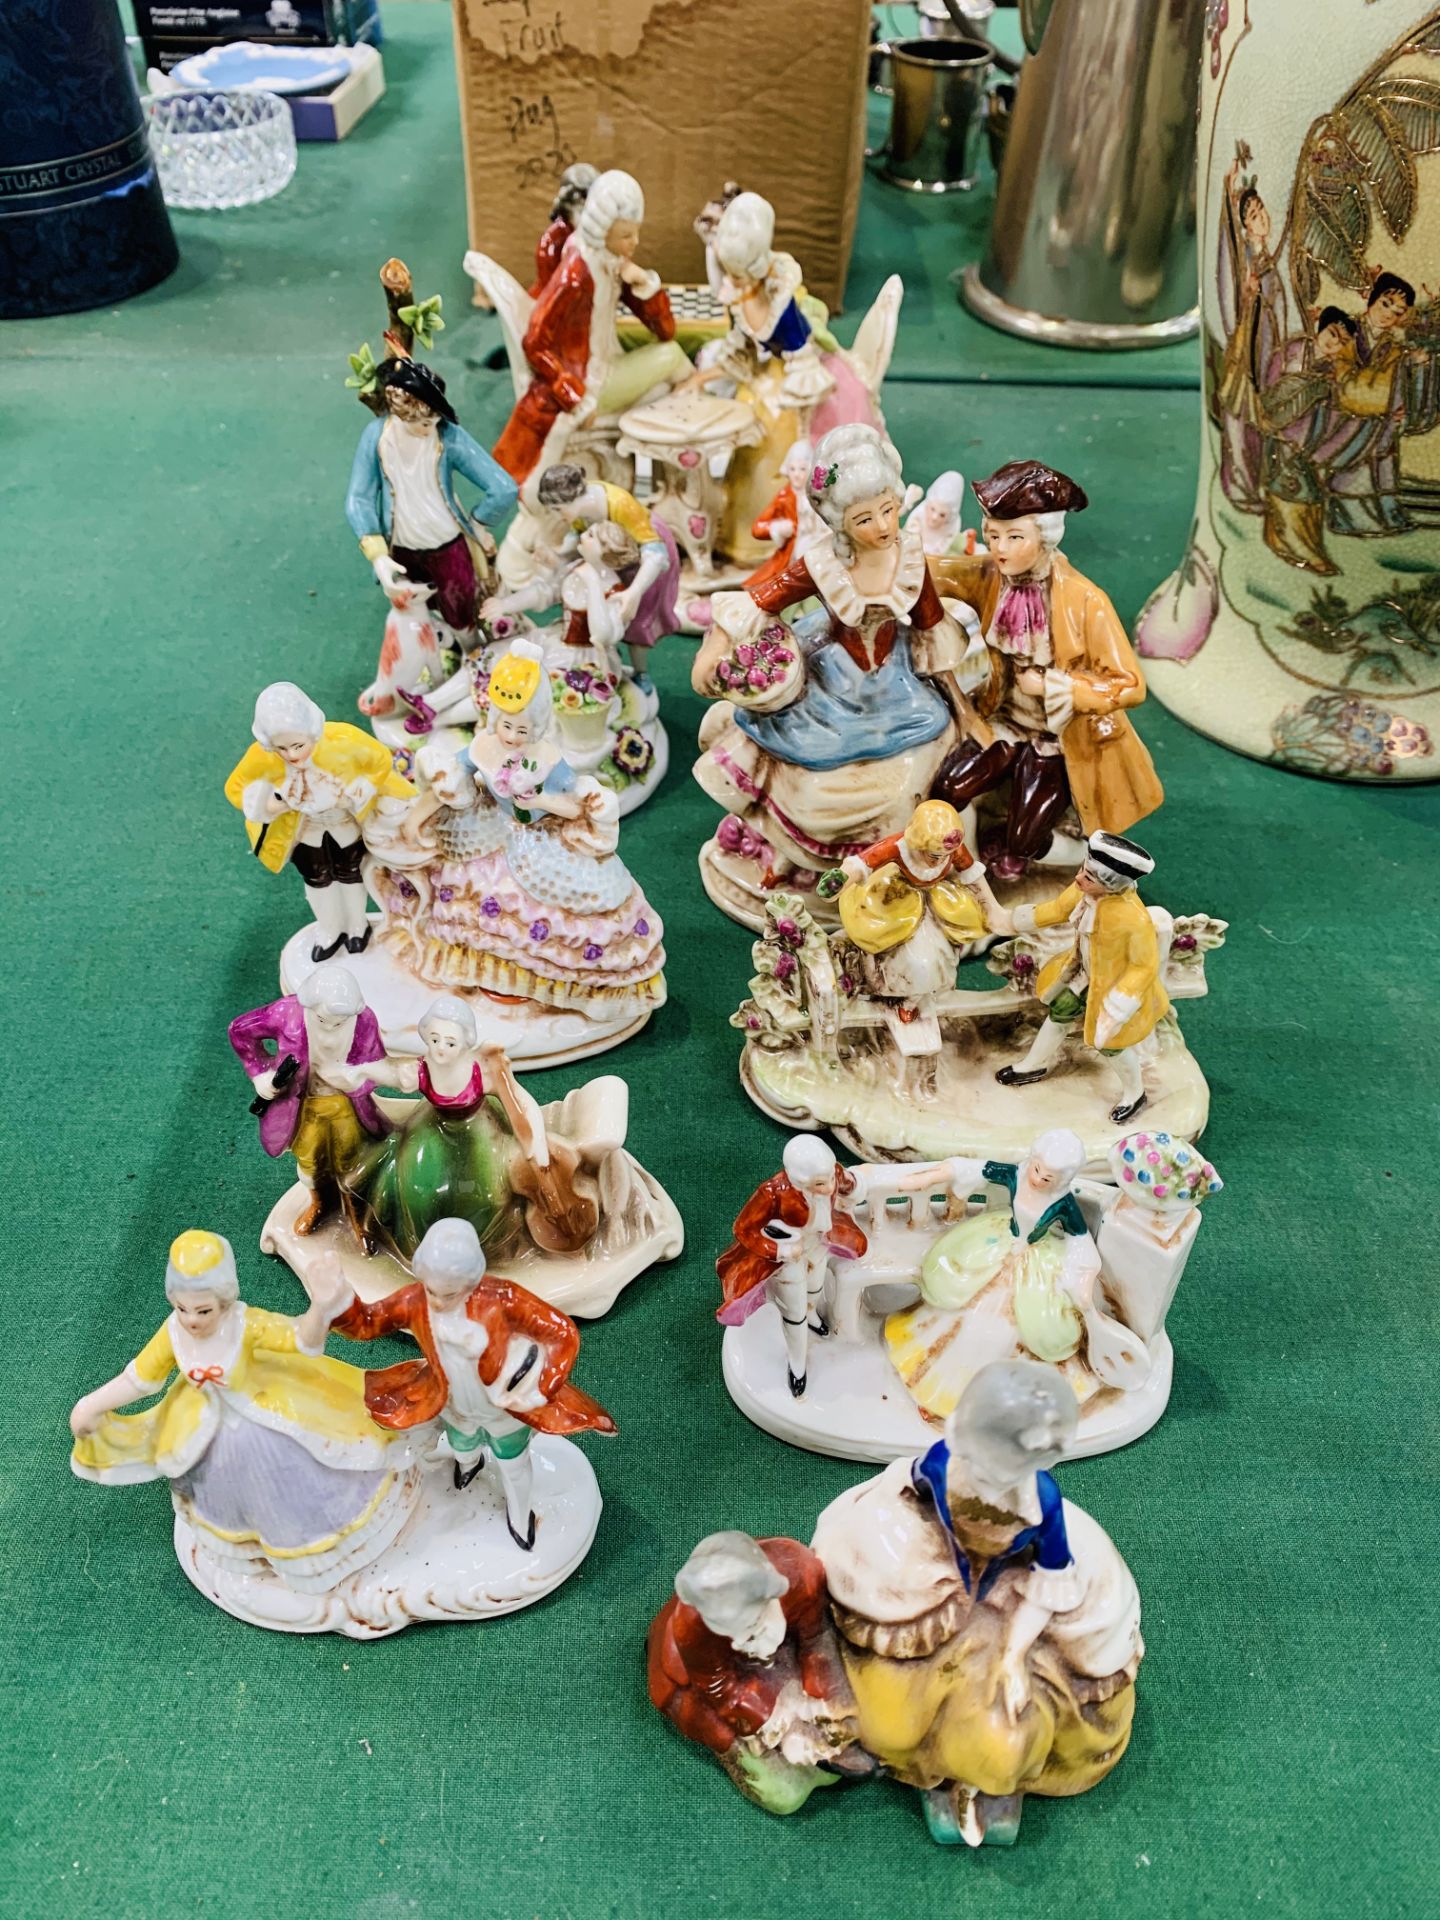 Eleven Continental porcelain figurines, including 2 couples playing board games